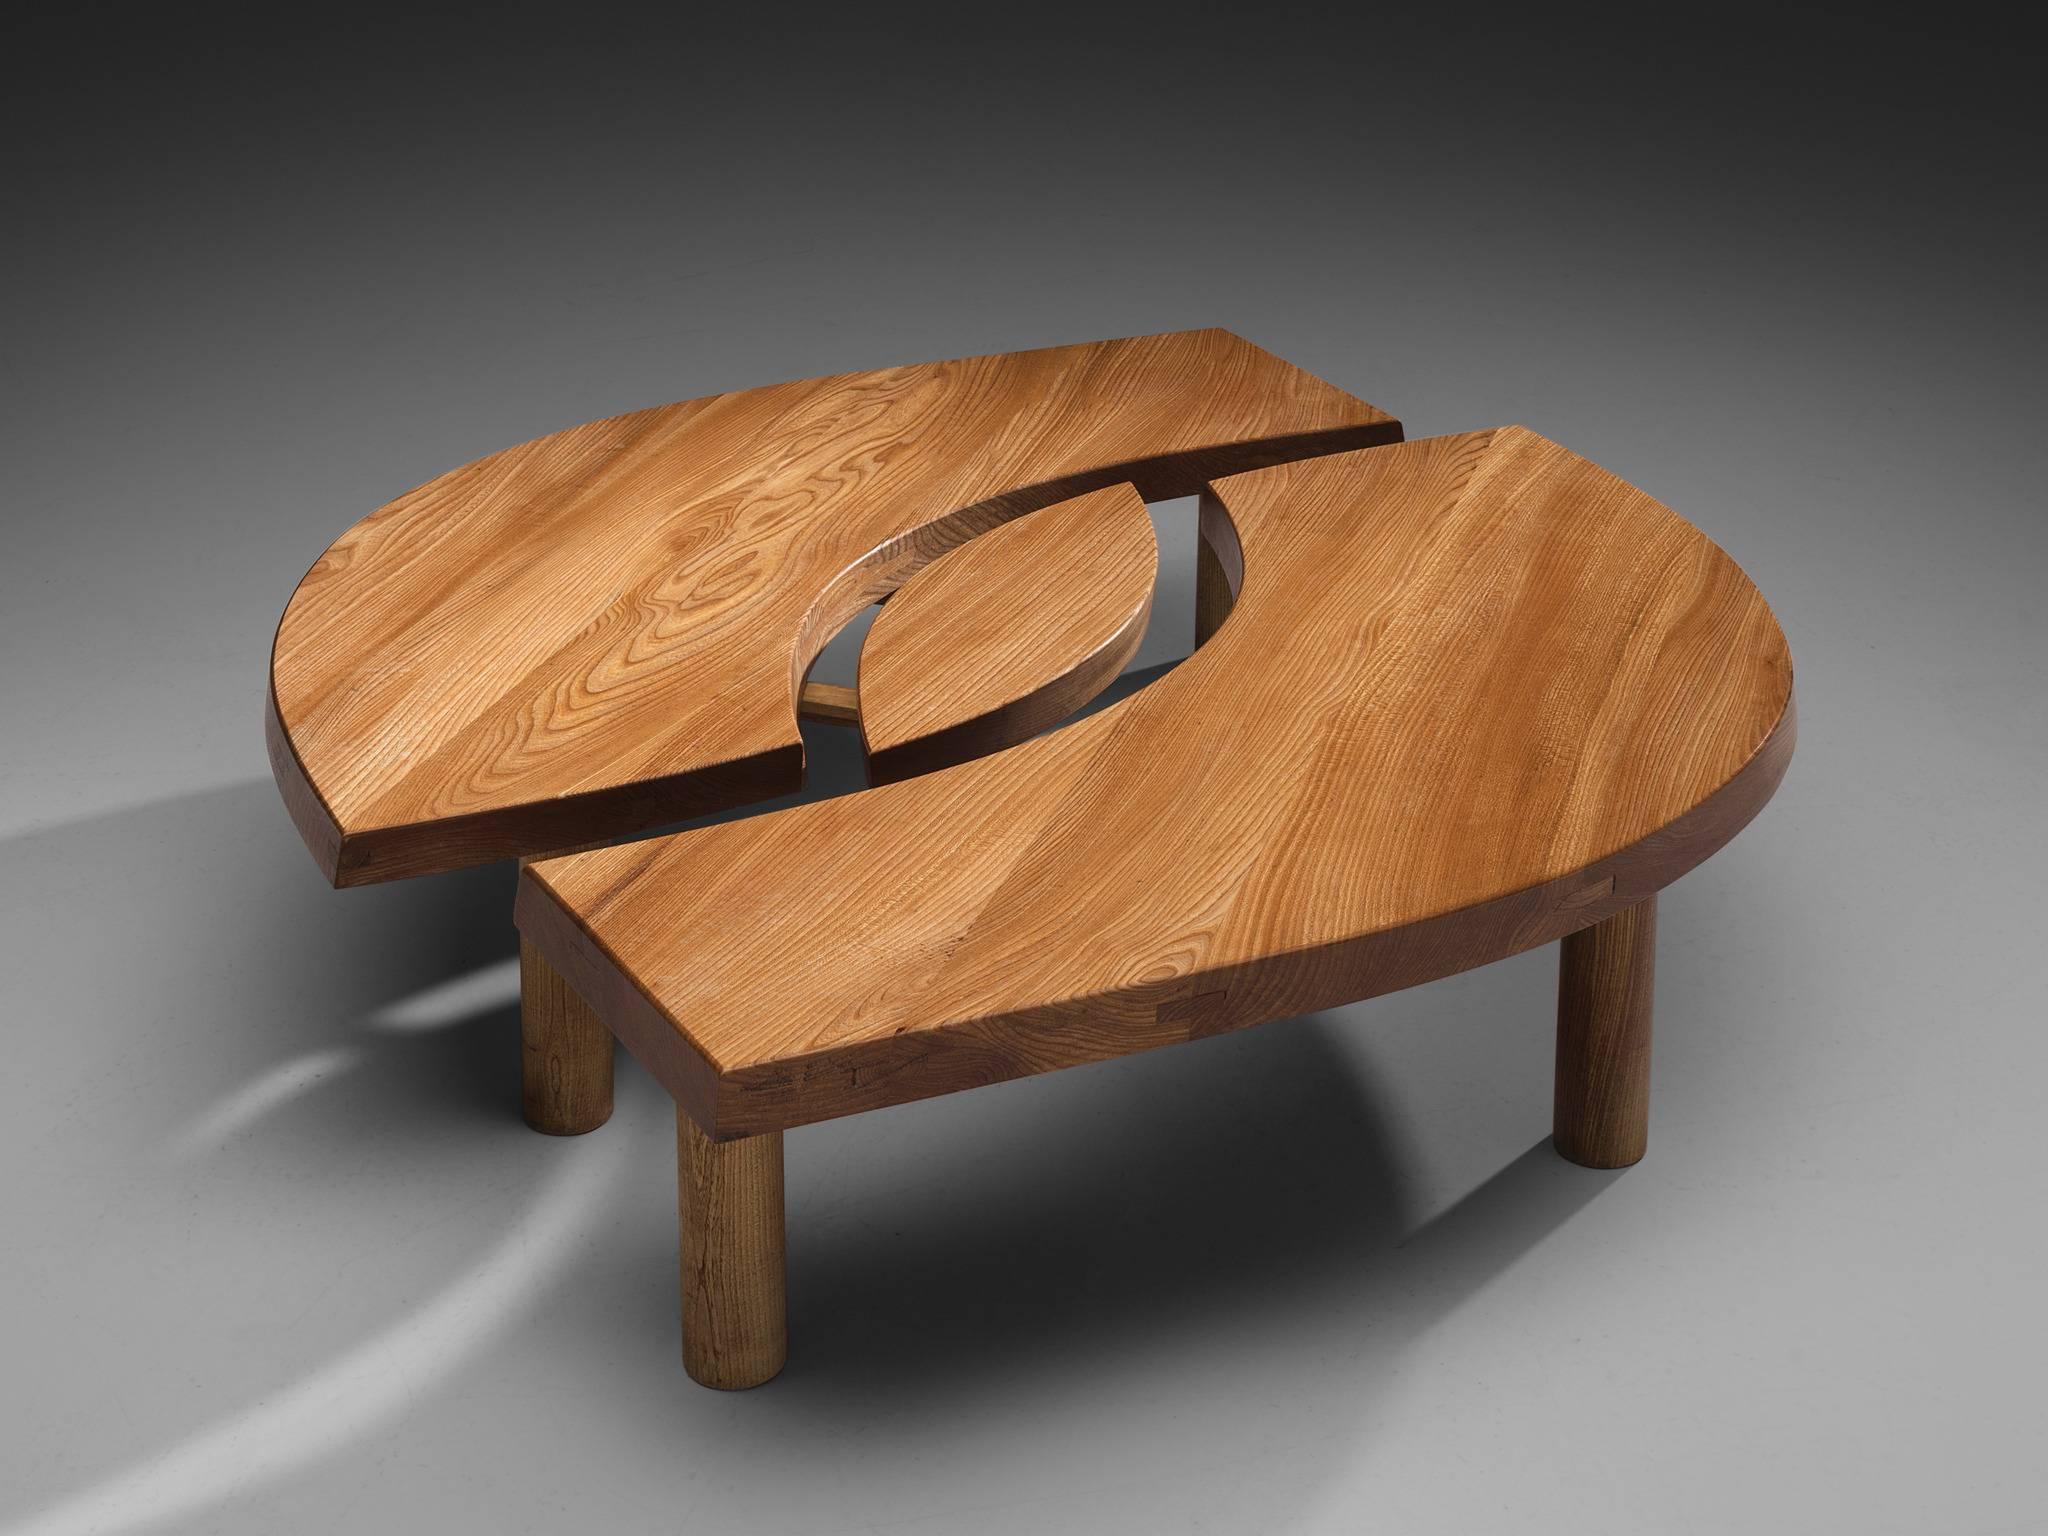 They are also well suited as consoles or small tables with high feet. This table consists of two arch-shaped tables and one oval middle. Interesting wood joints are visible on the side of the tabletop. In excellent condition with an admirable